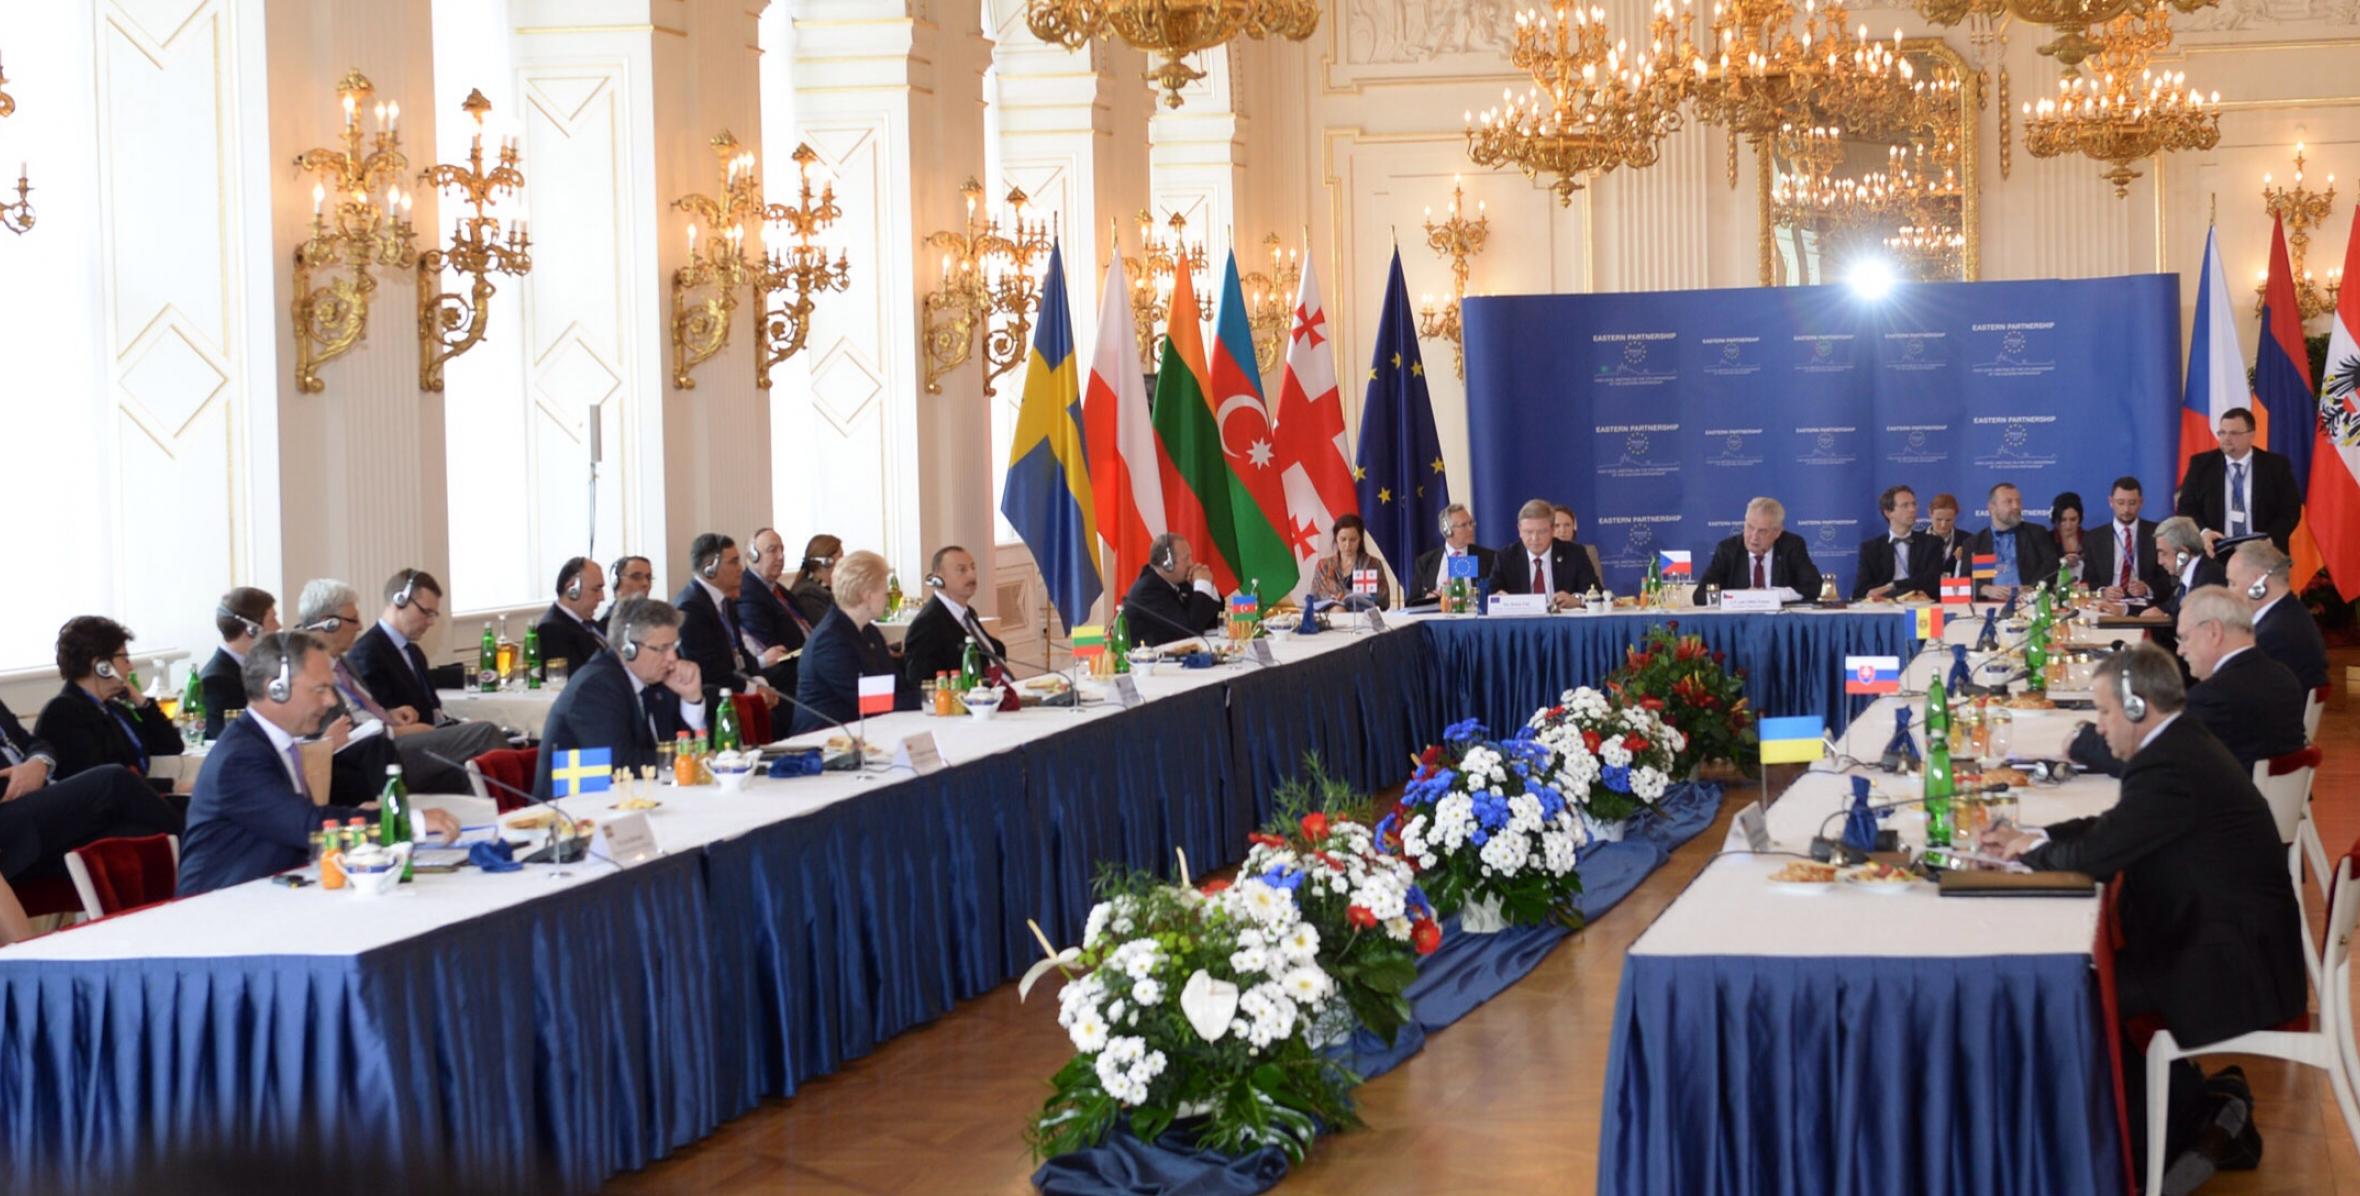 Ilham Aliyev addressed the summit dedicated to the fifth anniversary of the European Union’s "Eastern Partnership" program